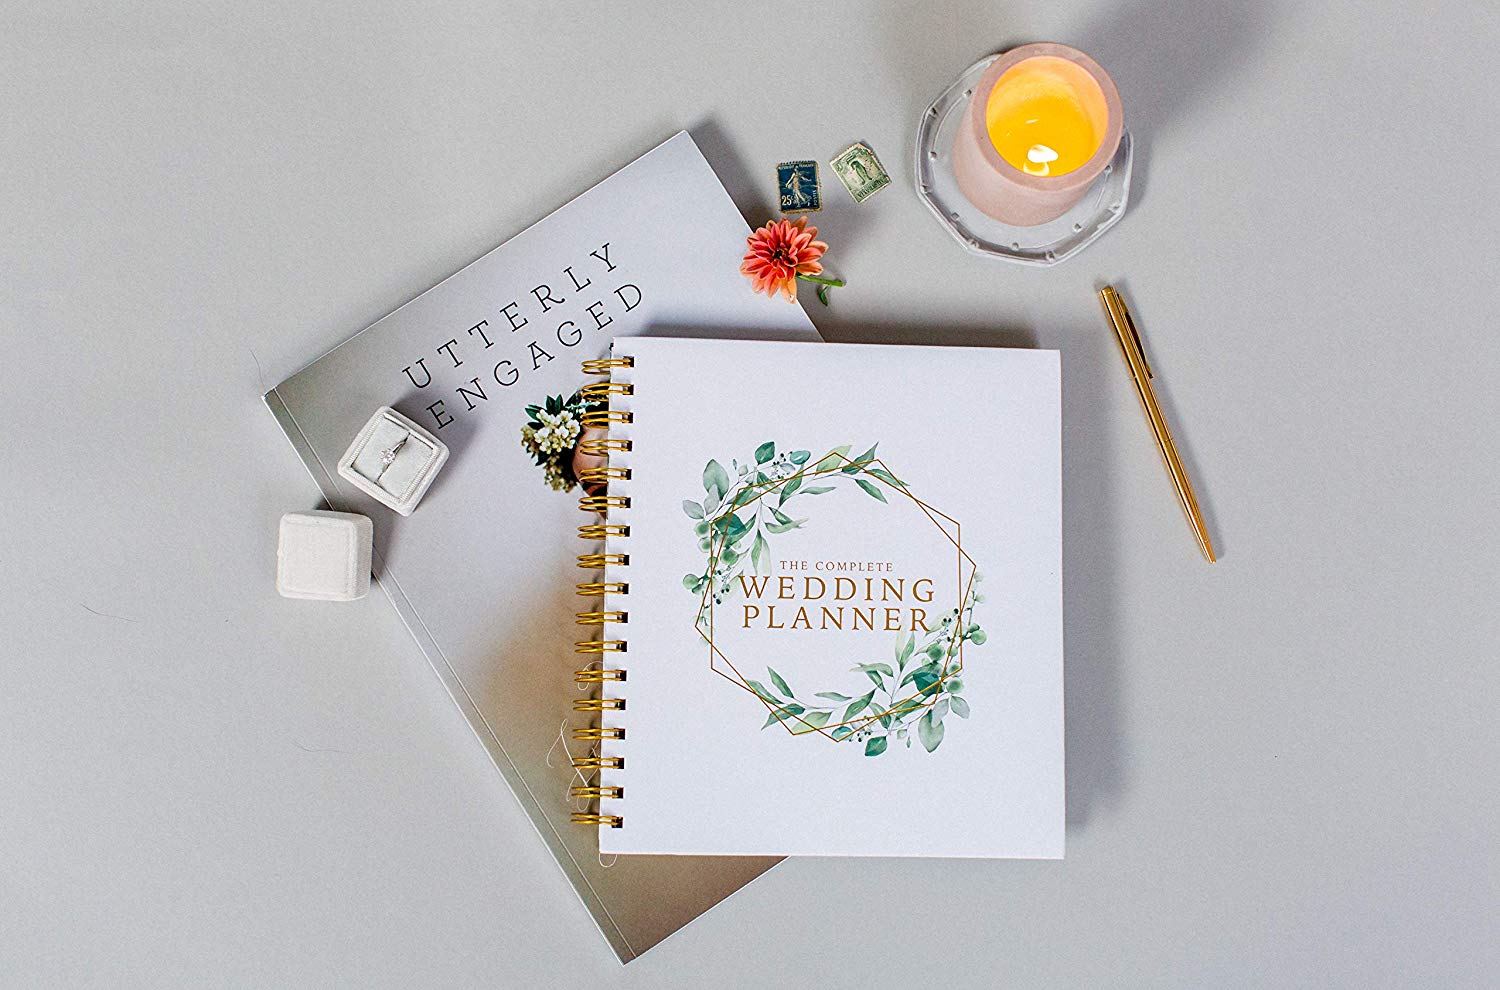 When to Book Your Wedding Planner and What to Know